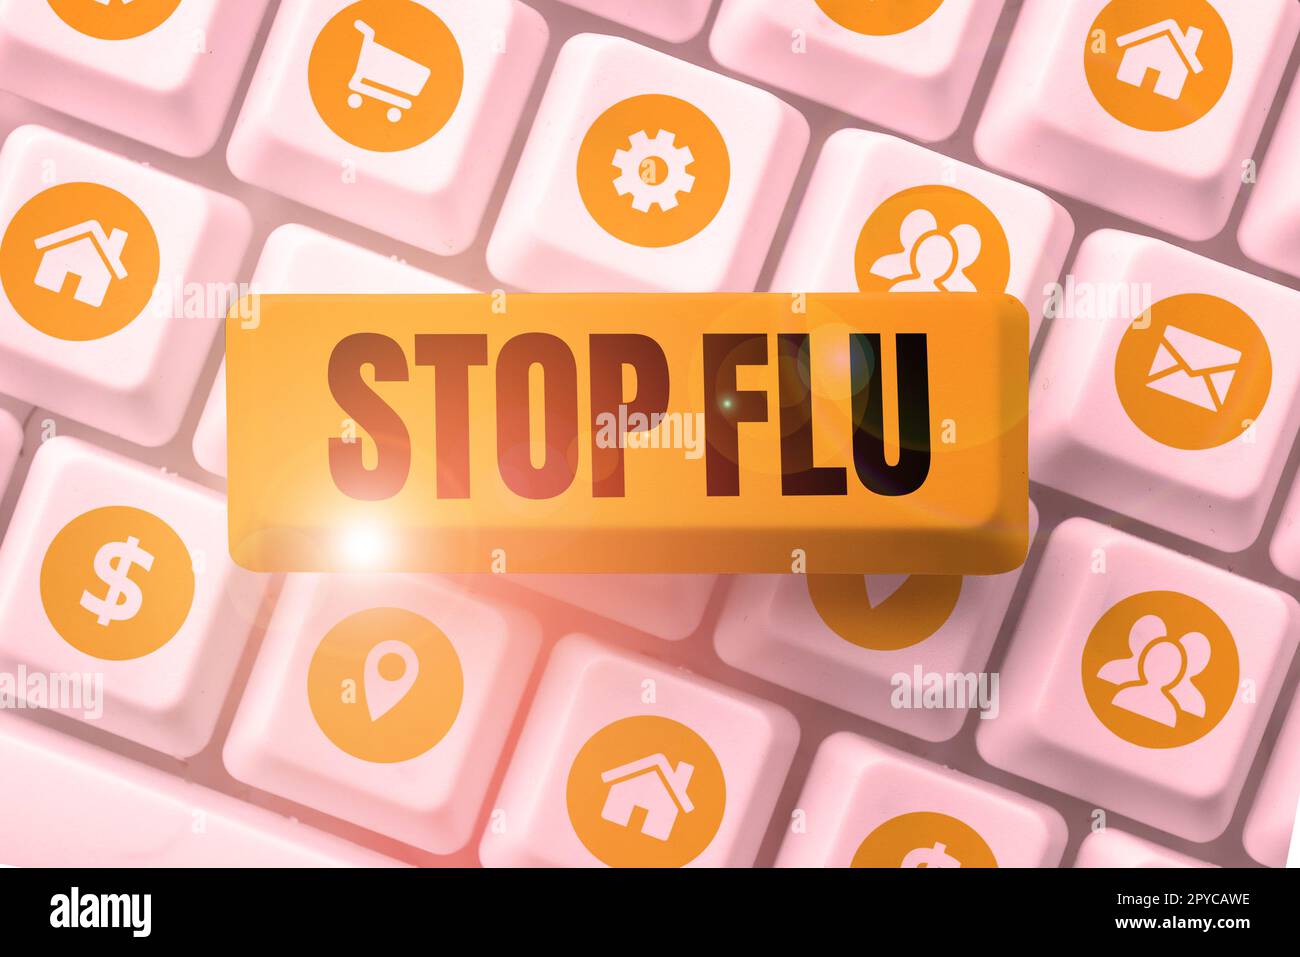 Writing displaying text Stop Flu. Internet Concept Treat the contagious respiratory illness caused by influenza virus Stock Photo